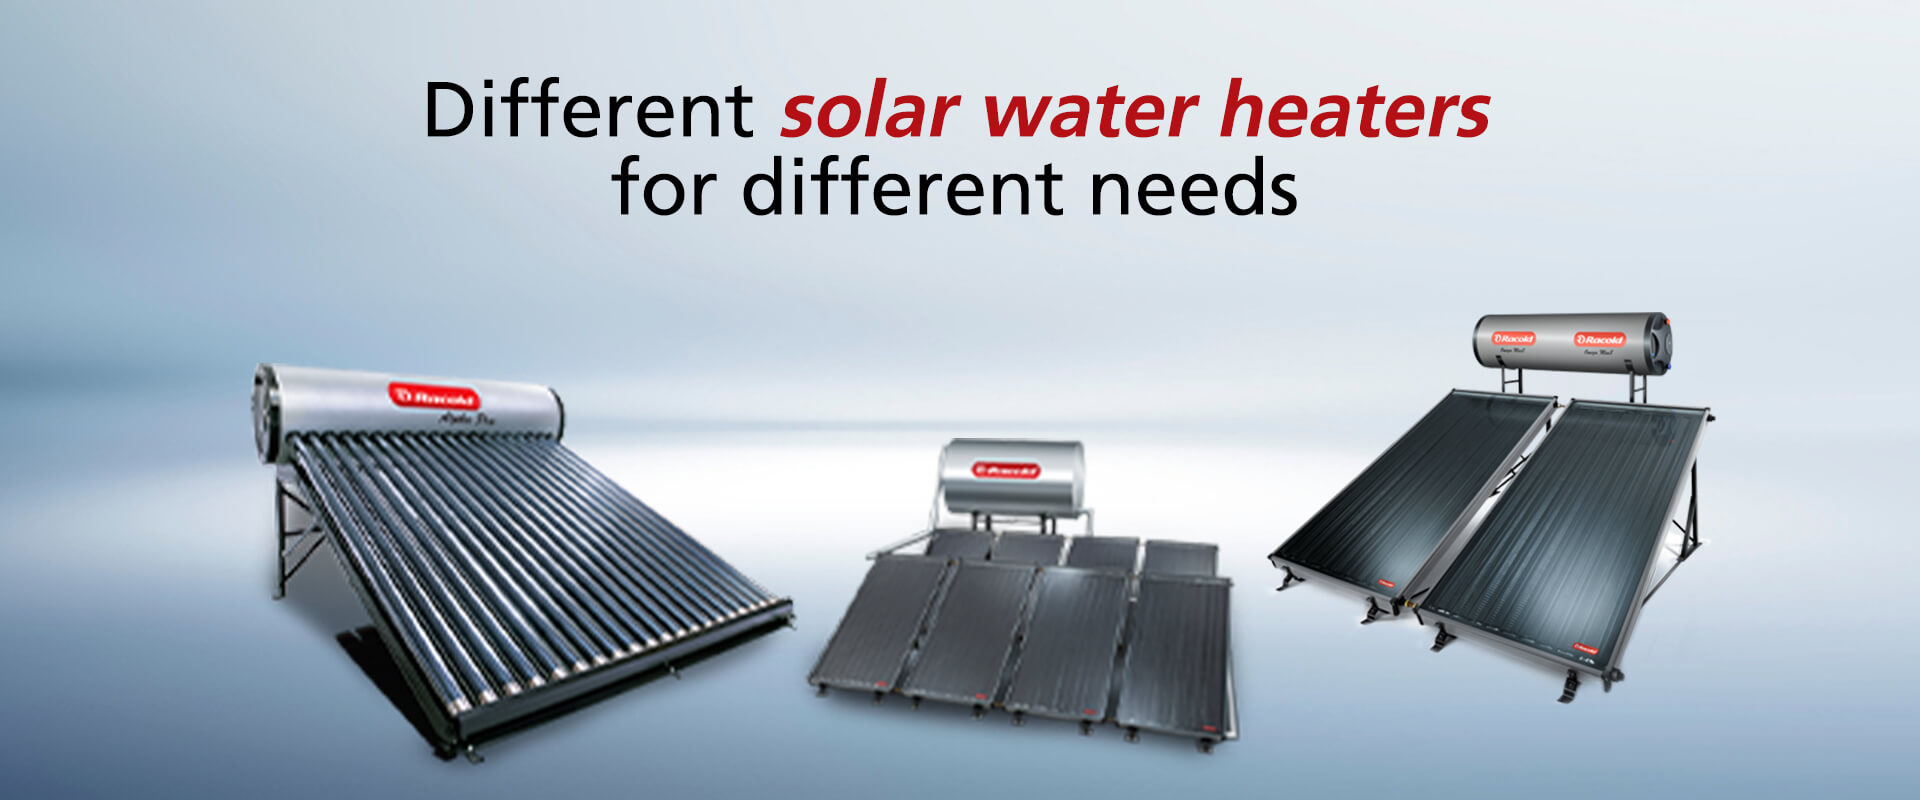 Racold’s solar water heaters